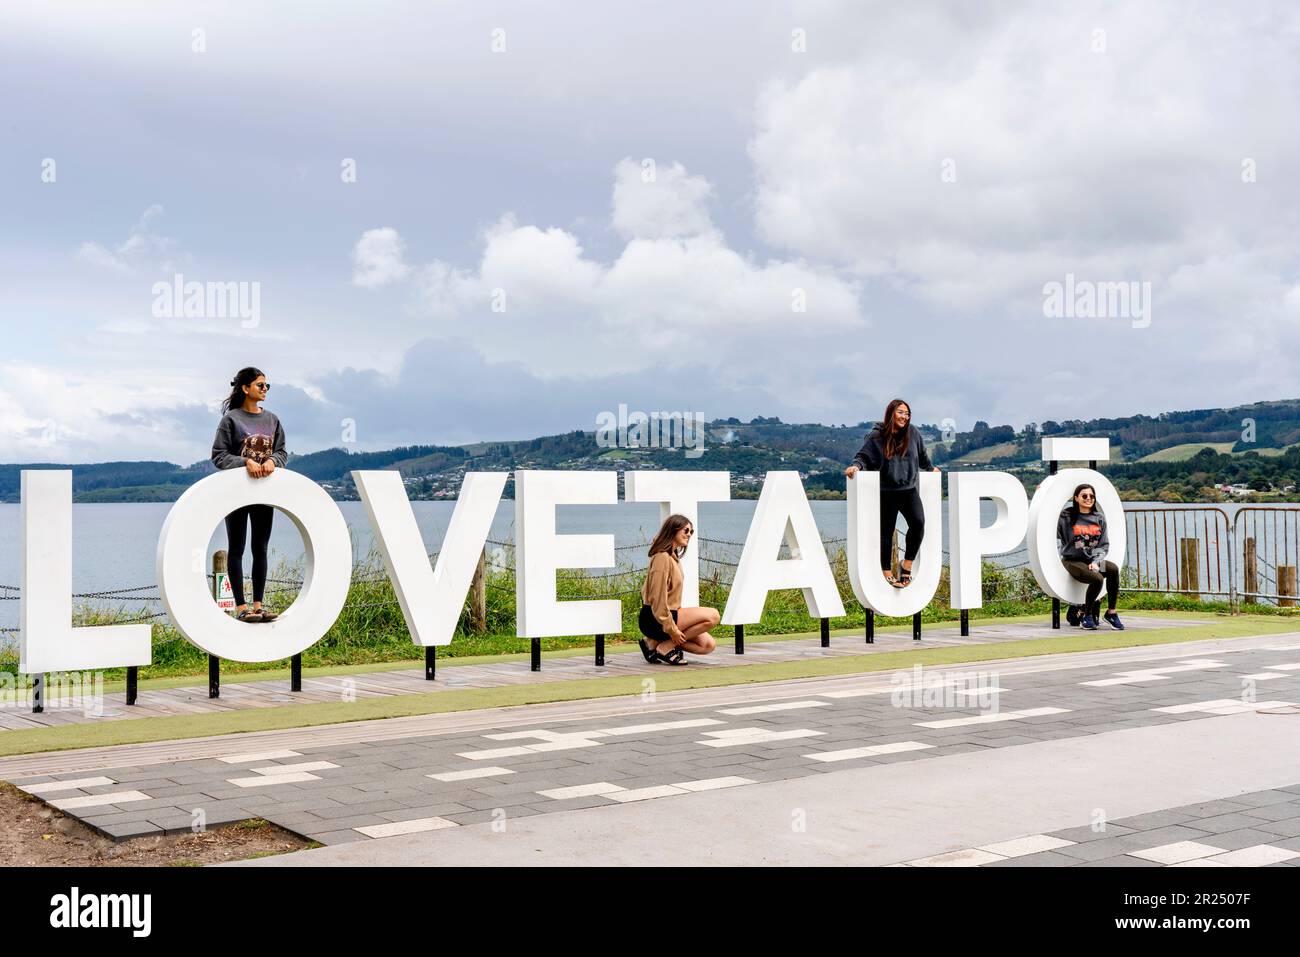 People Pose For Photos At The 'Love Taupo' Sign, Lake Taupo, North Island, New Zealand. Stock Photo